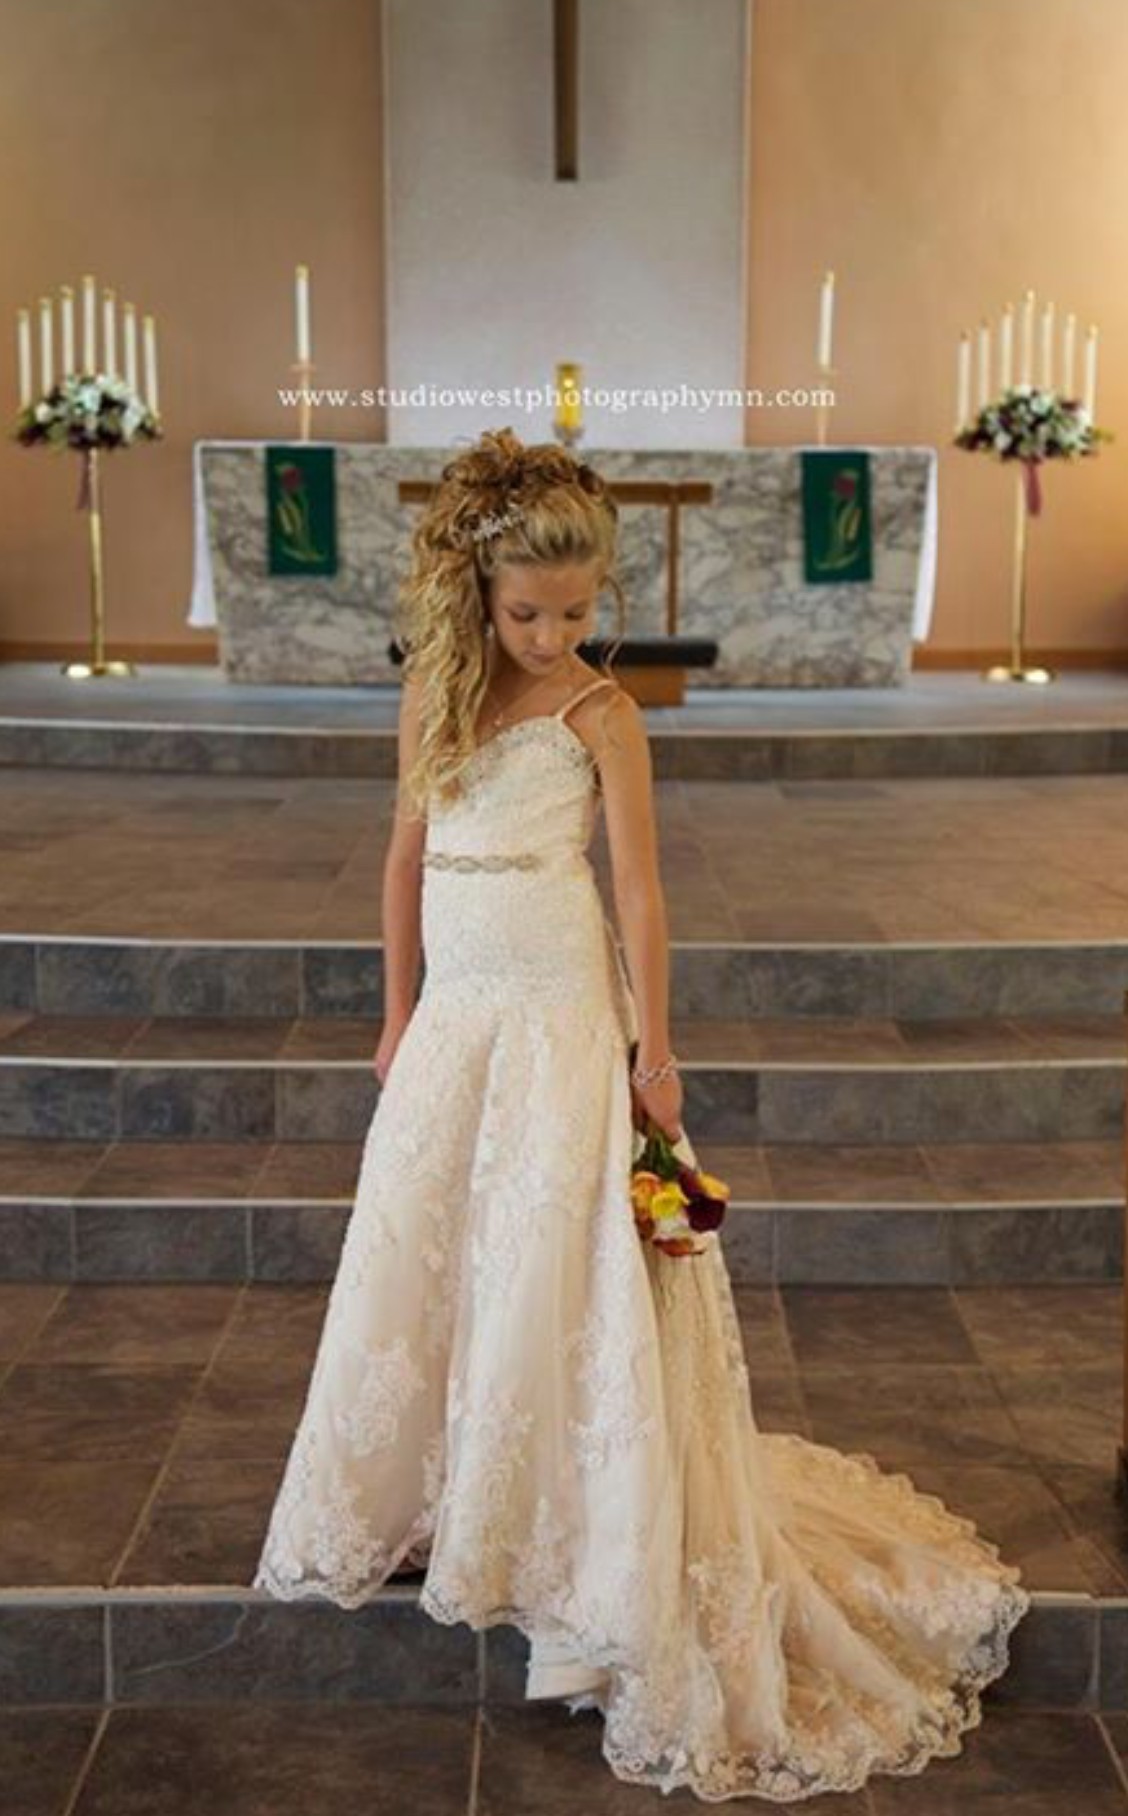 This flower girl dress matches my wedding gown.